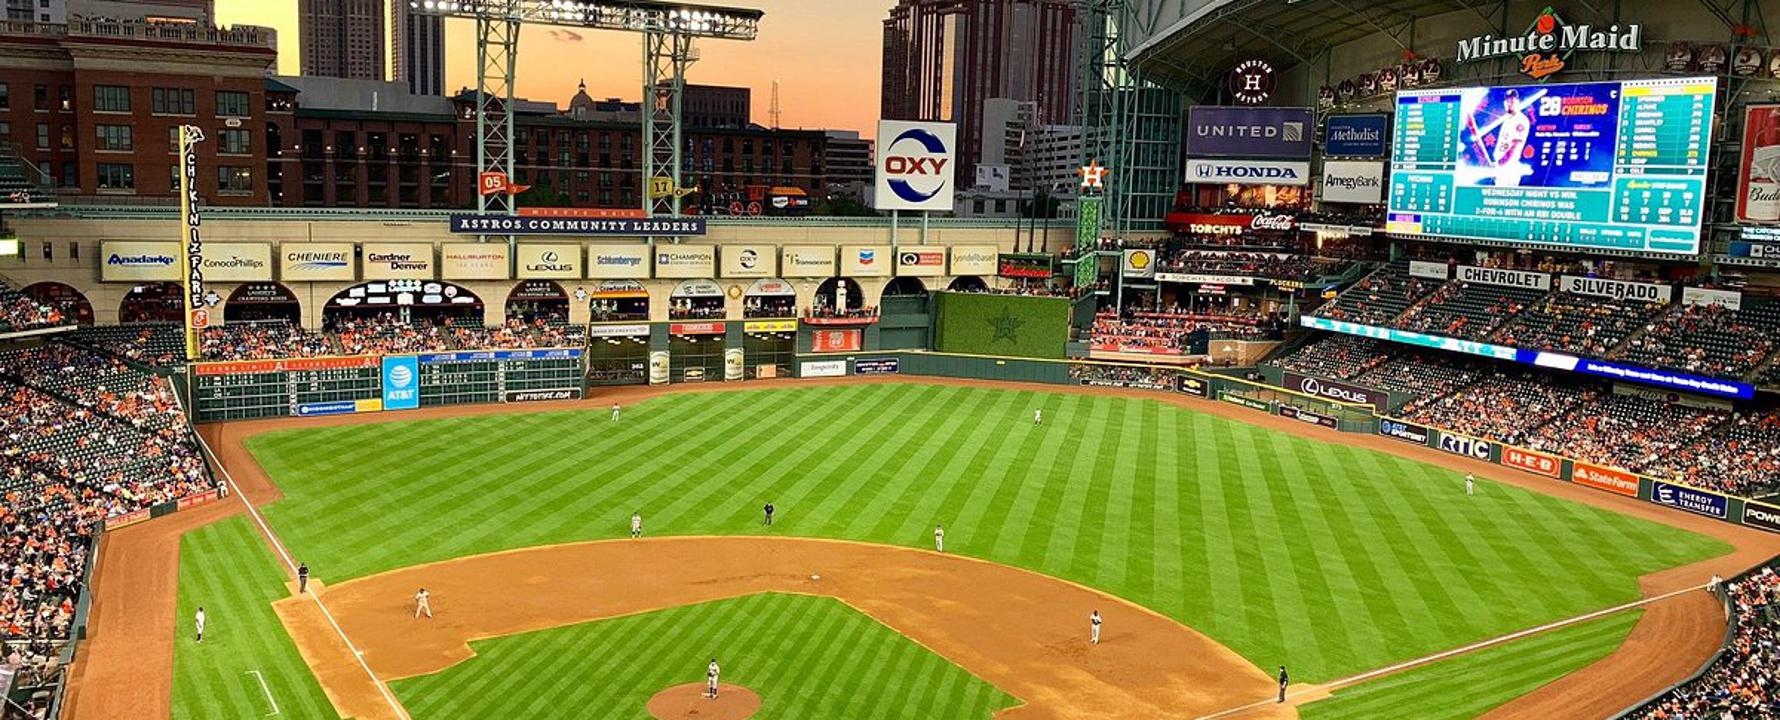 Minute Maid Park Featured Live Event Tickets & 2023-2024 Schedules